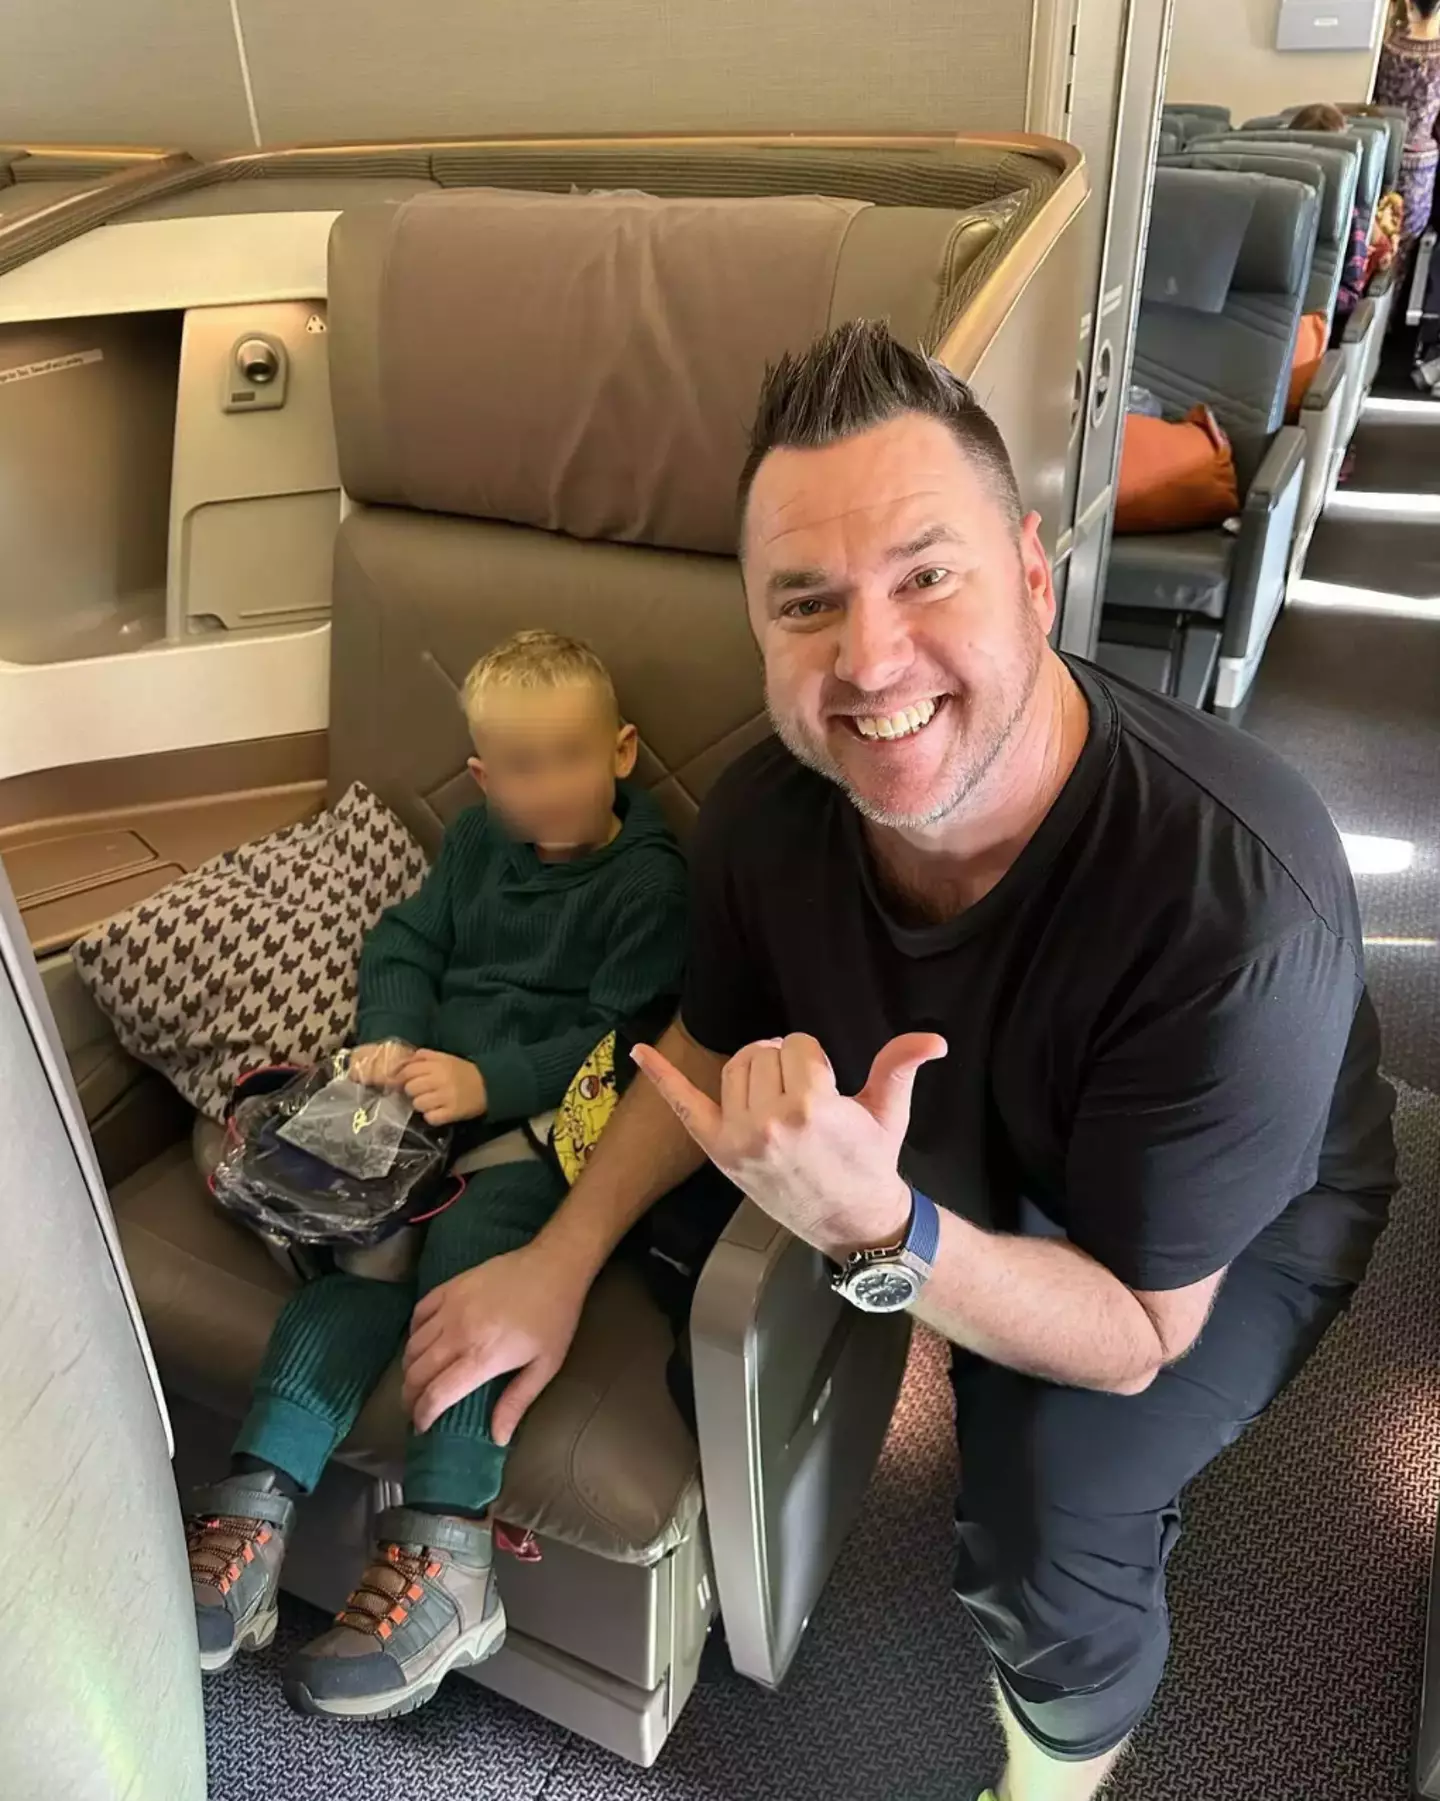 Michael Rutherford shared a clip of a flight attendant feeding his son during a flight to Tokyo.